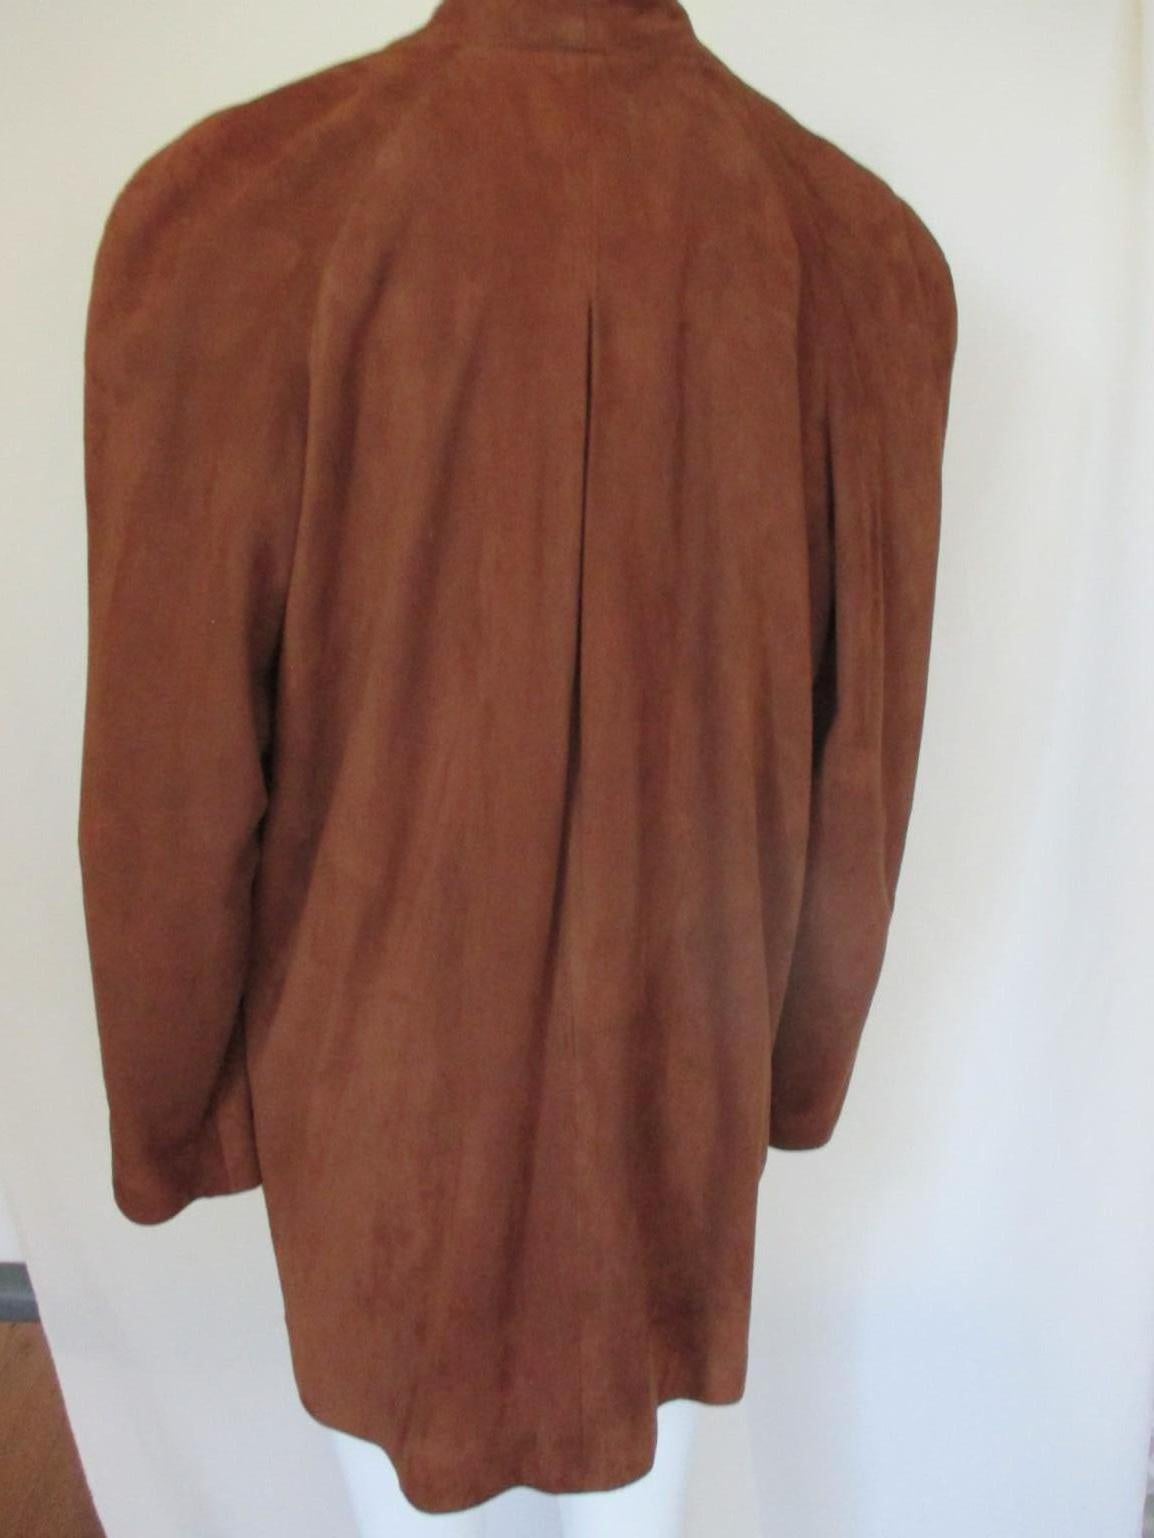 Pierre Balmain Soft Suede Leather Coat In Good Condition For Sale In Amsterdam, NL